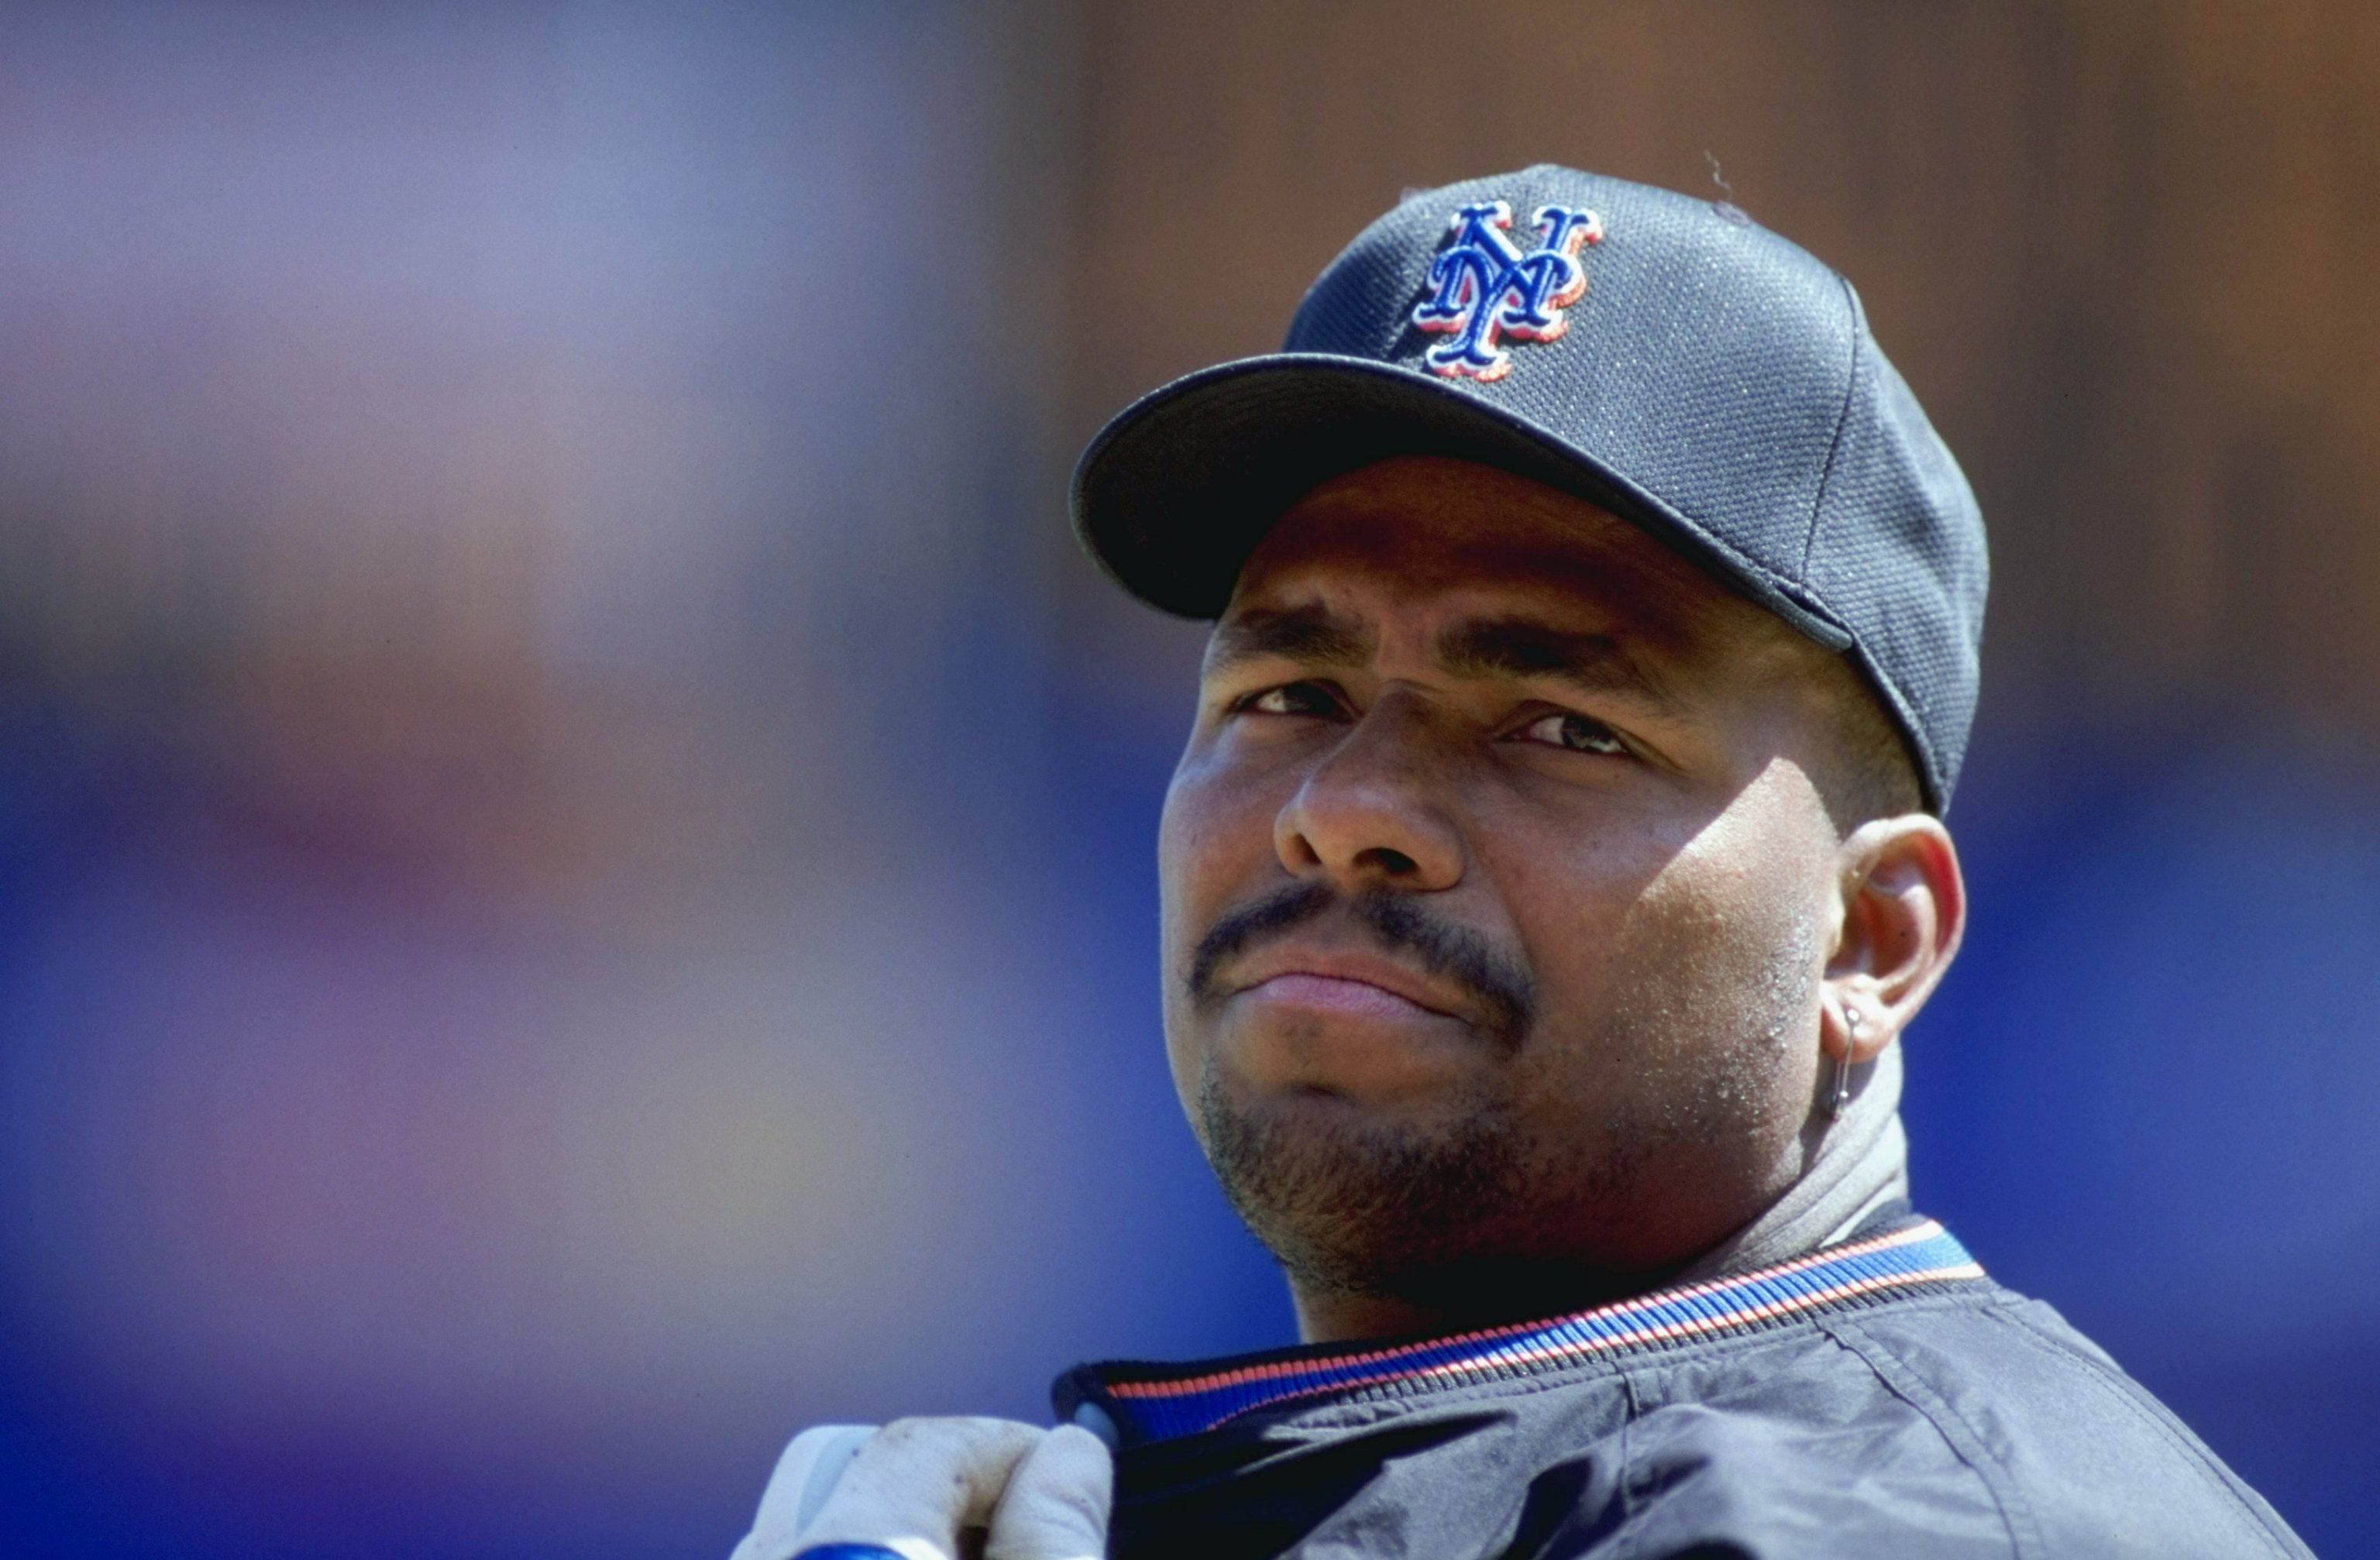 Bobby Bonilla is famous for being one of the retired athletes still getting paid by their former teams.